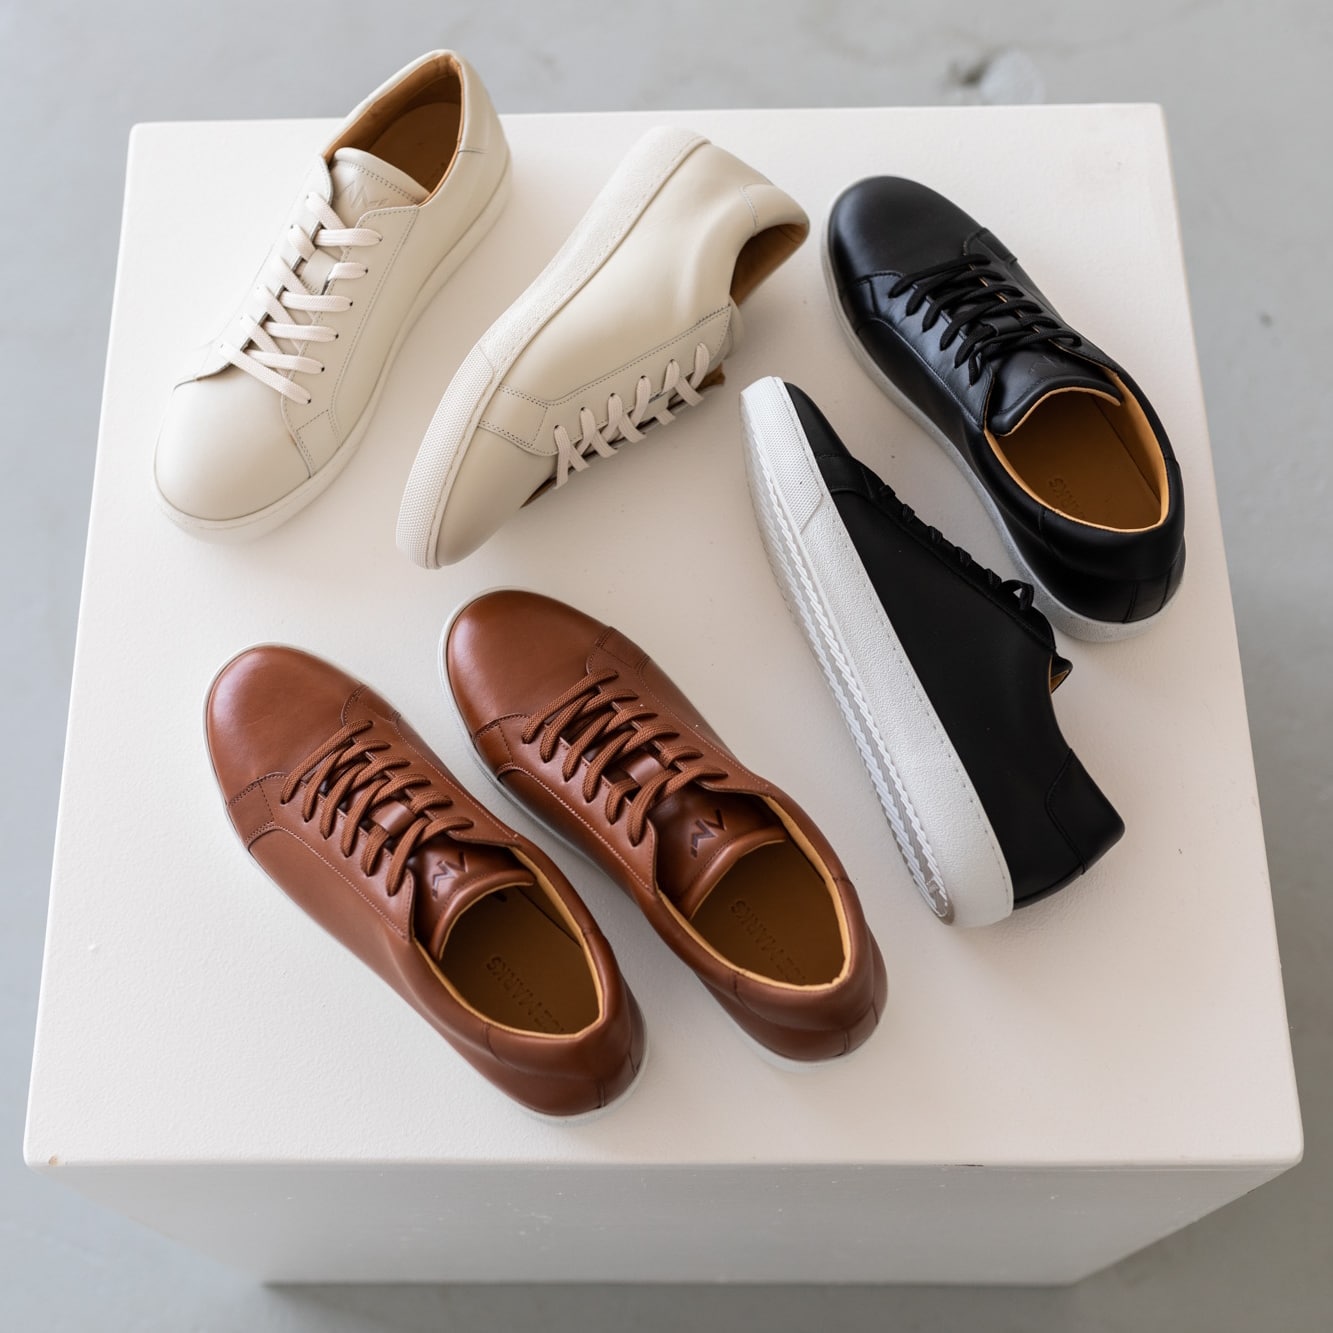 What Are The Best Dress Sneakers For Men?